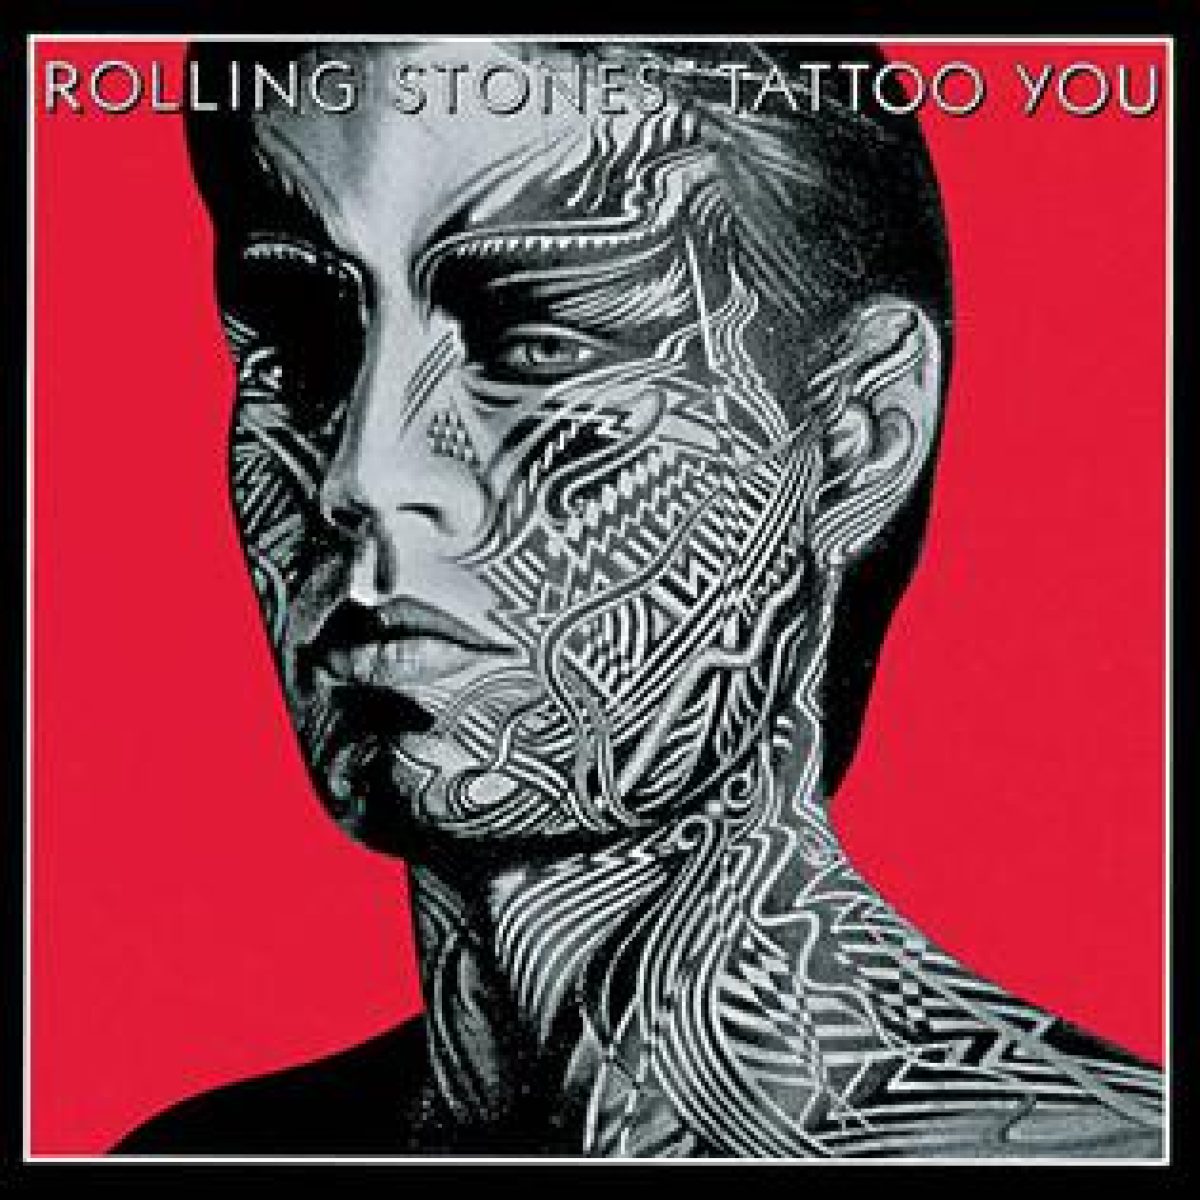 Rolling Stones, Tattoo You